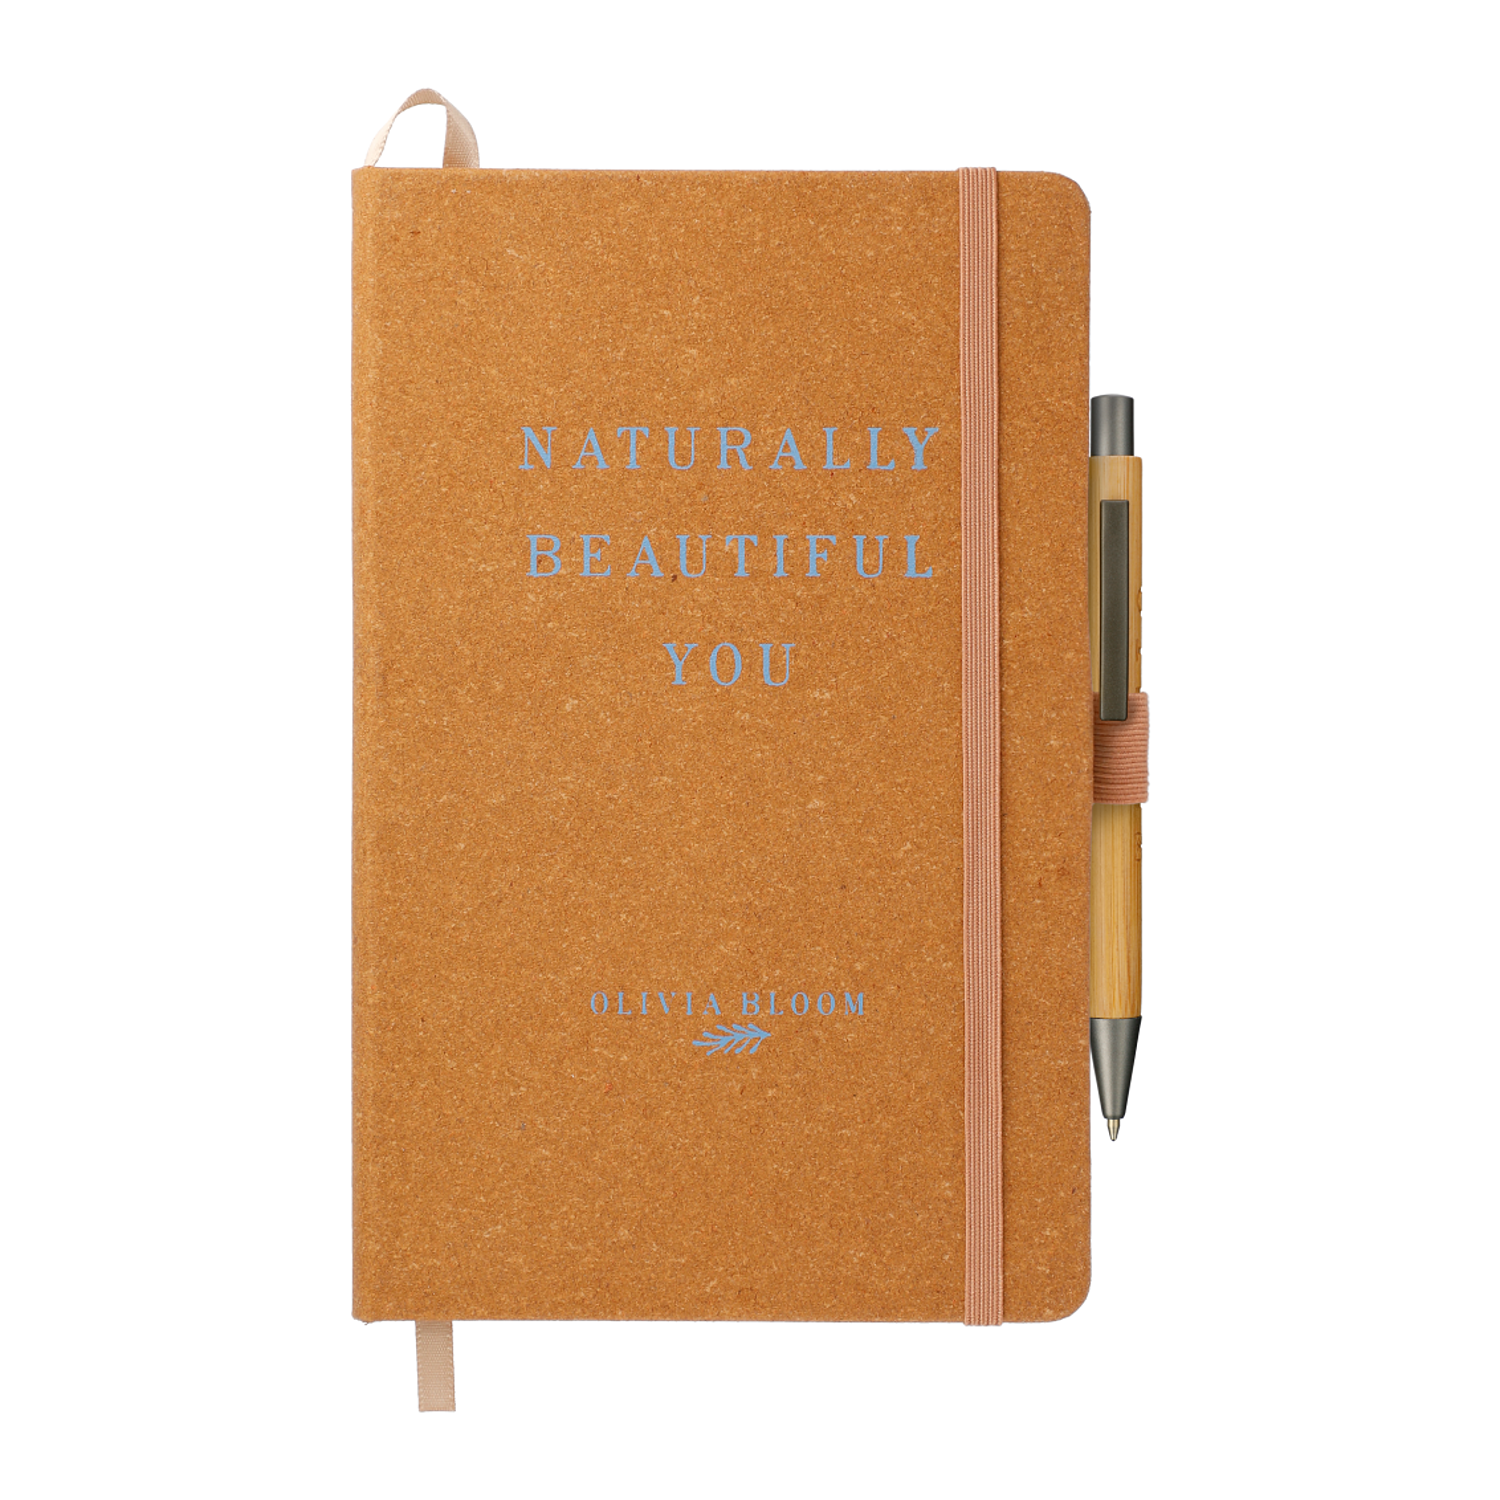 5.5" x 8.5" FSC Recycled Leather Bound Journal